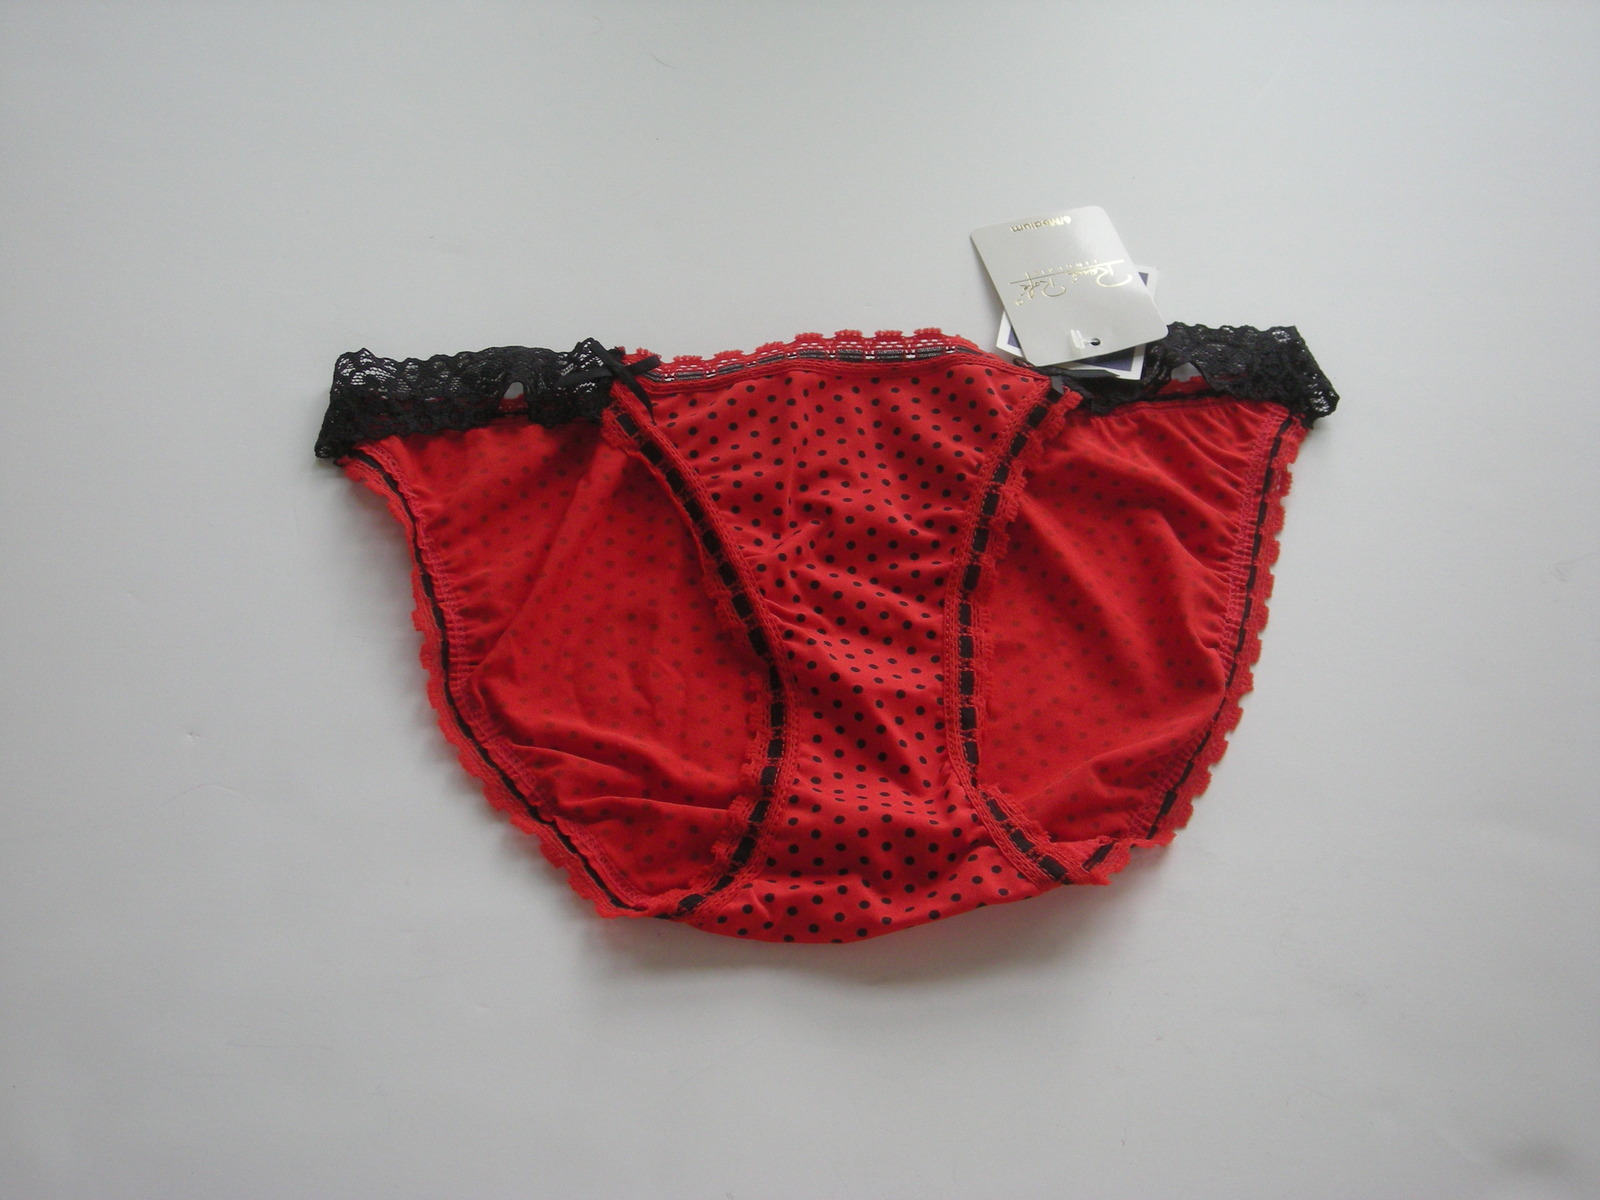 Rene Rofe Silky Red Bikini with Black Lace Strings and Black Dots Size 6 - $6.99